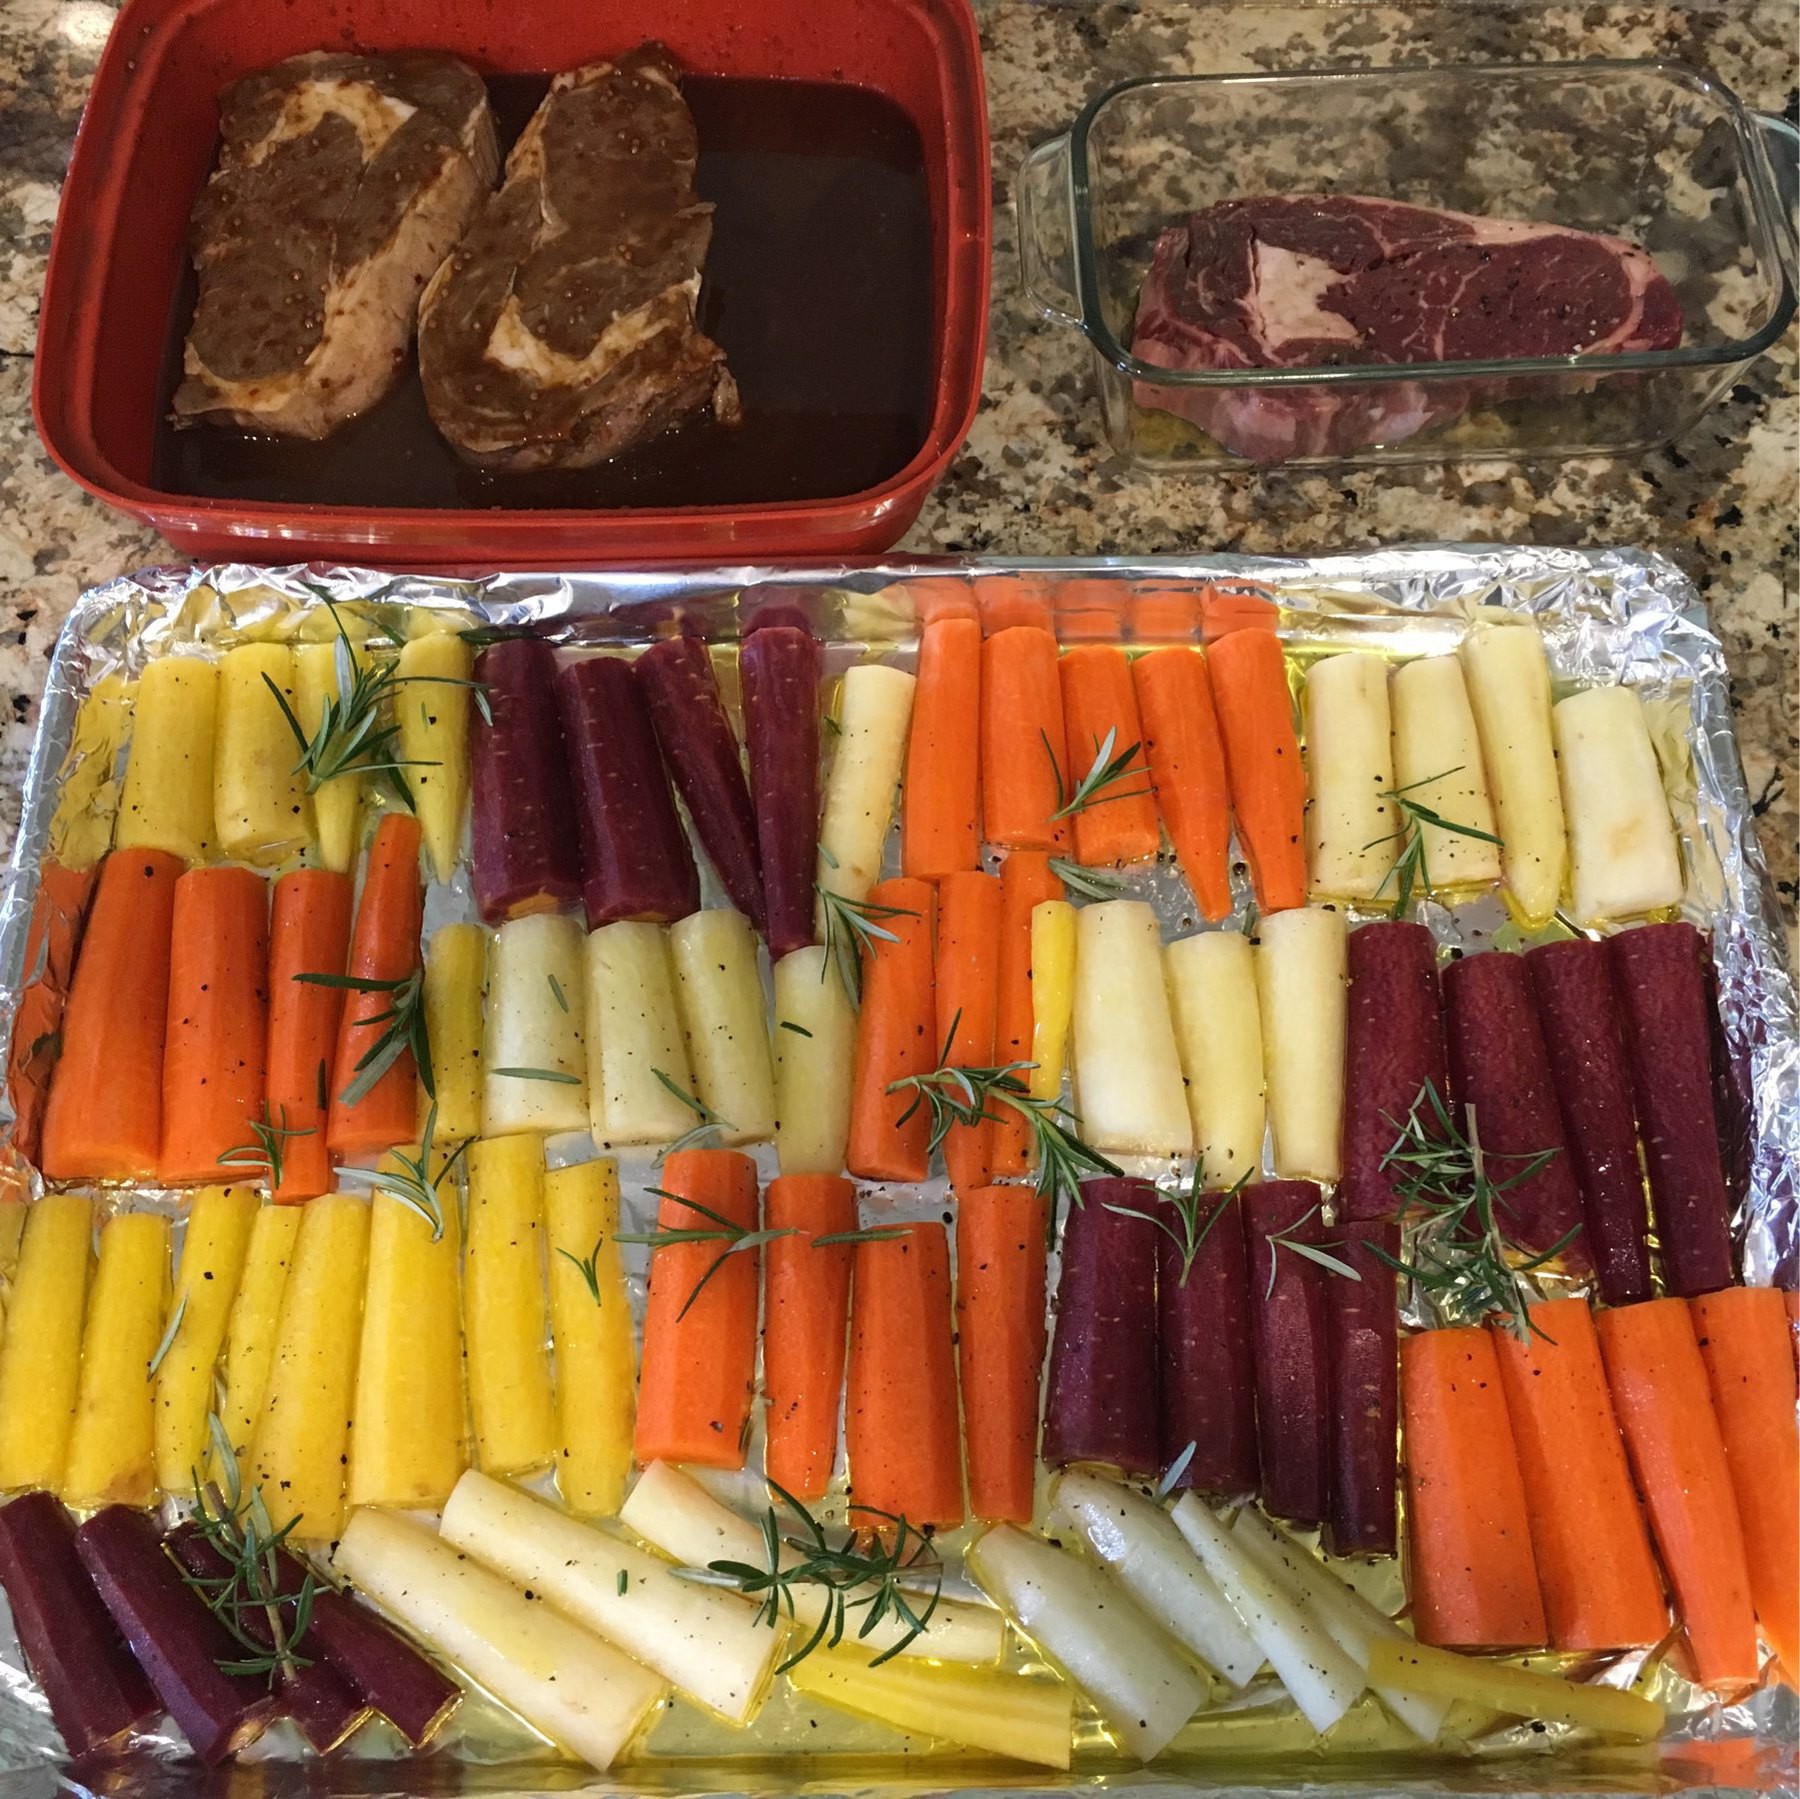 Steak and carrots, prepped